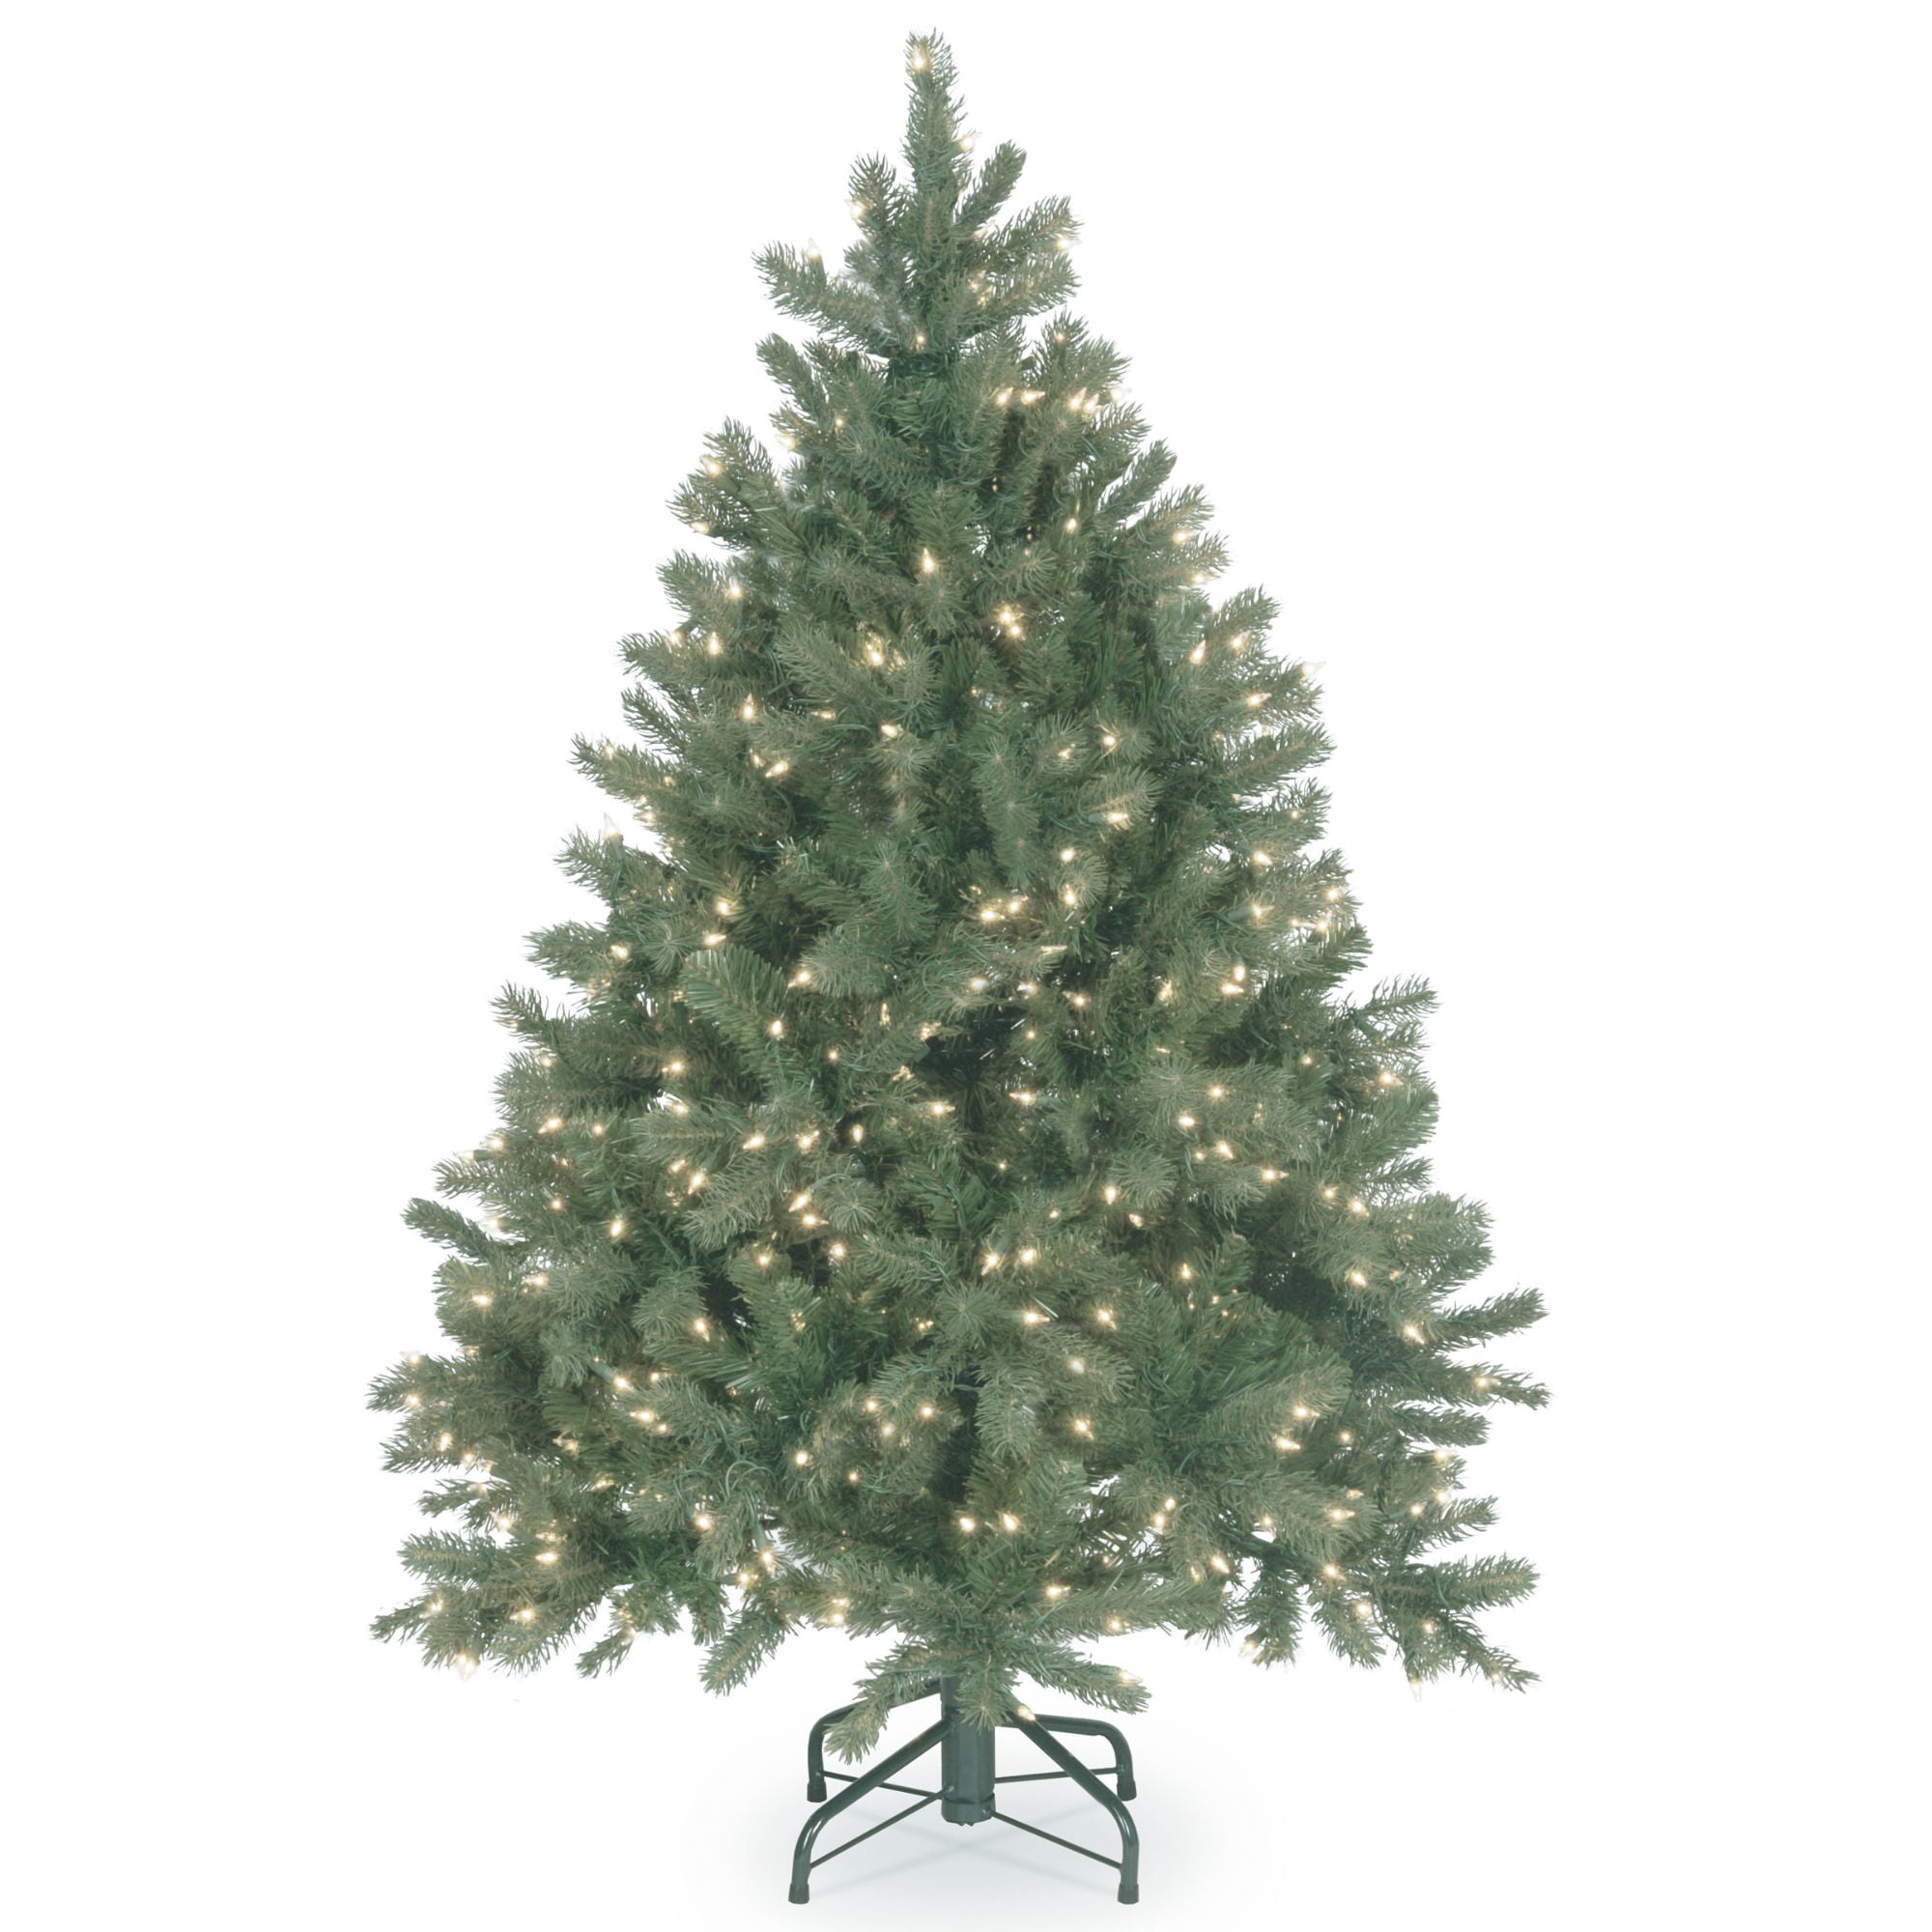 Details about   ALEKO 6 feet Artificial Holiday Snow-flocked Branches Pre-Lit Christmas Tree 